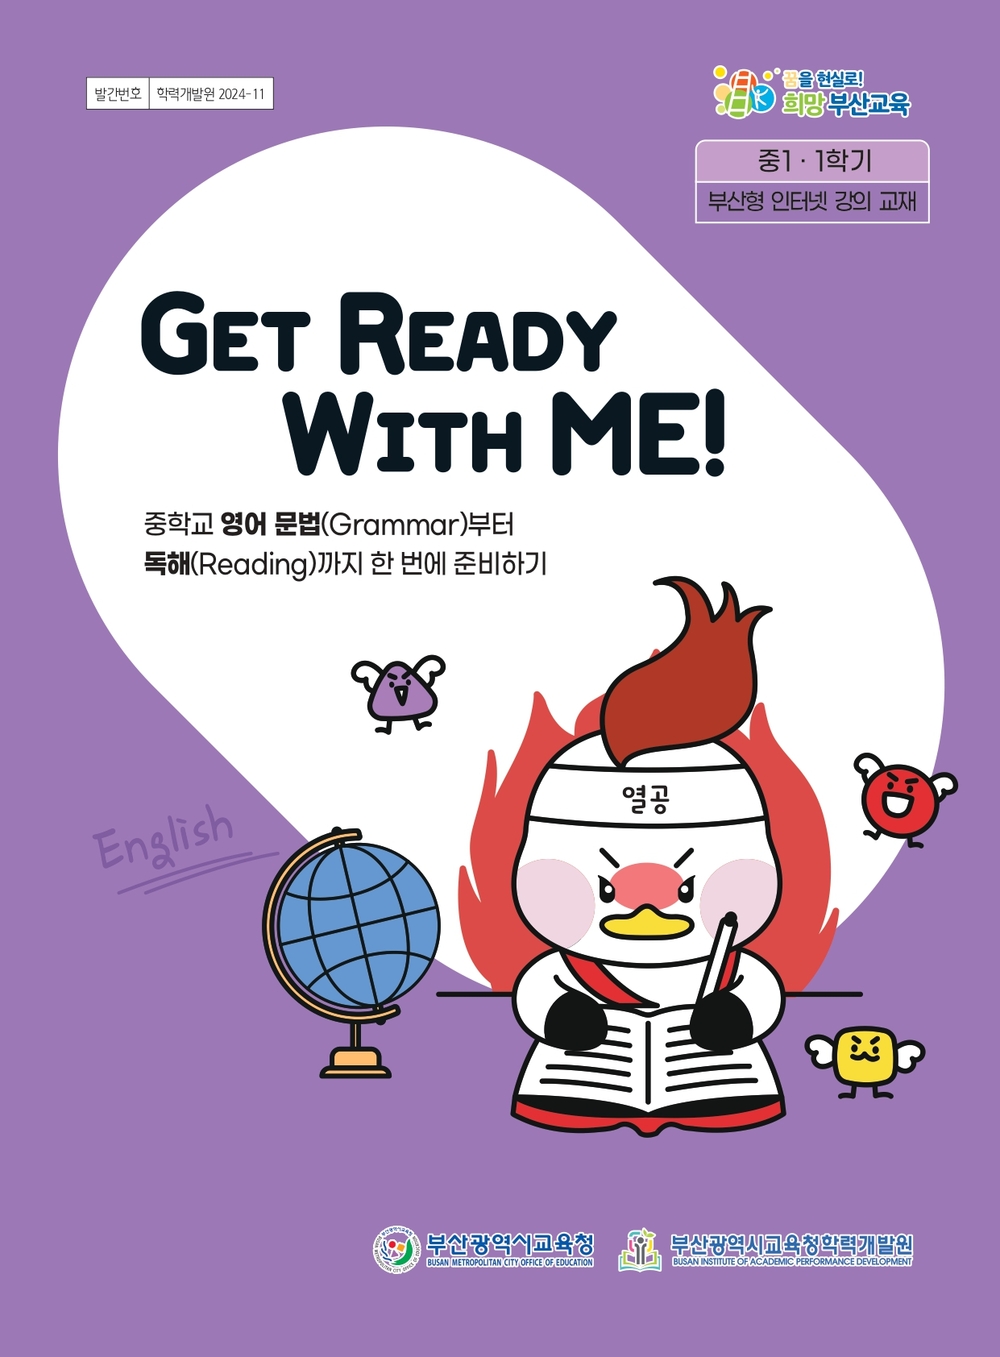 Get Ready With ME! 교재 이미지